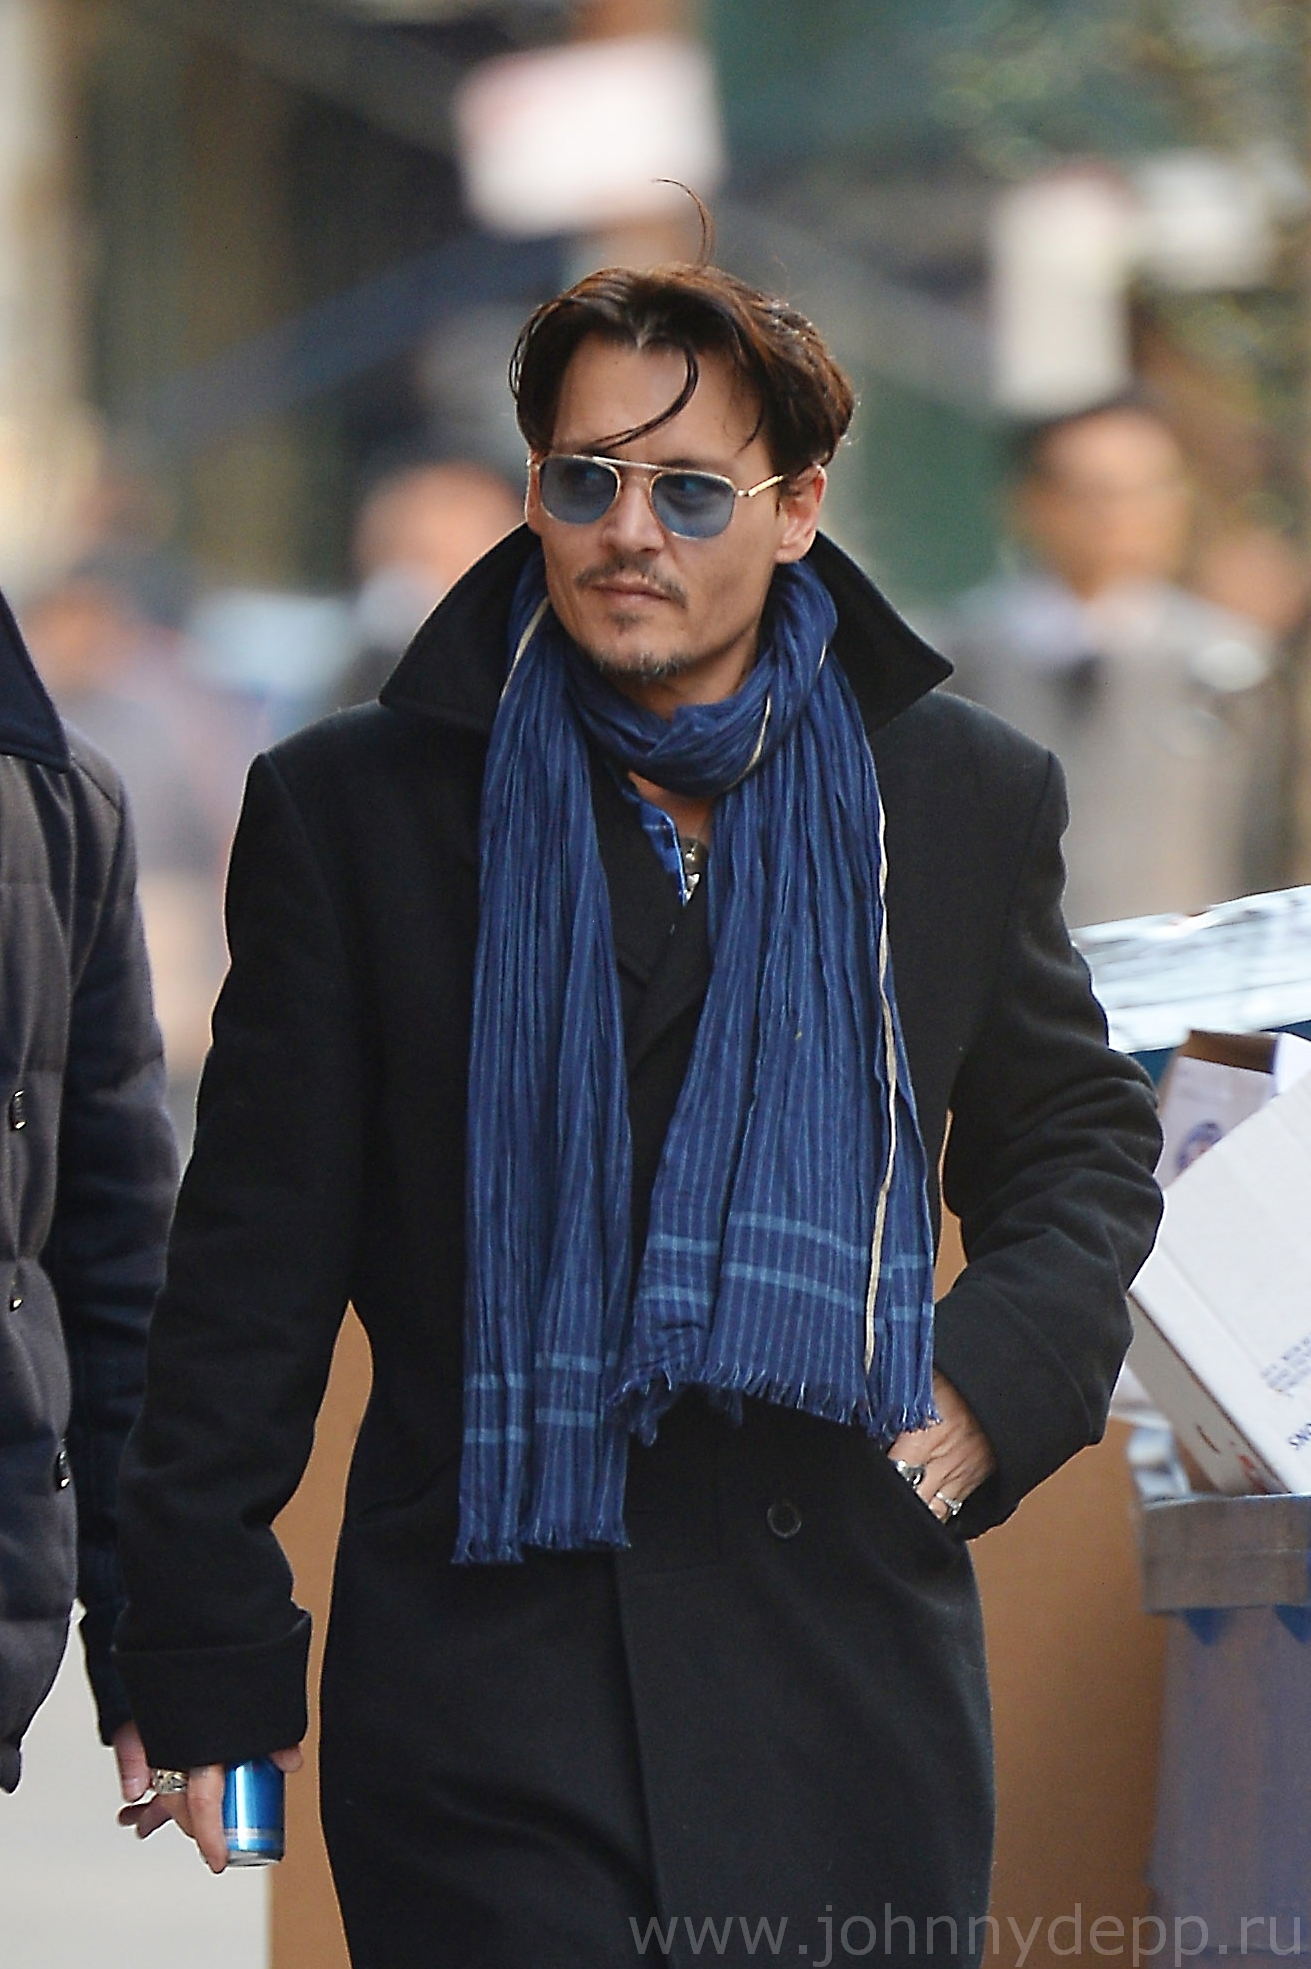 Johnny Depp is the Leading Man in Amber Heard’s Life! | Amber Heard, Johnny Depp ...